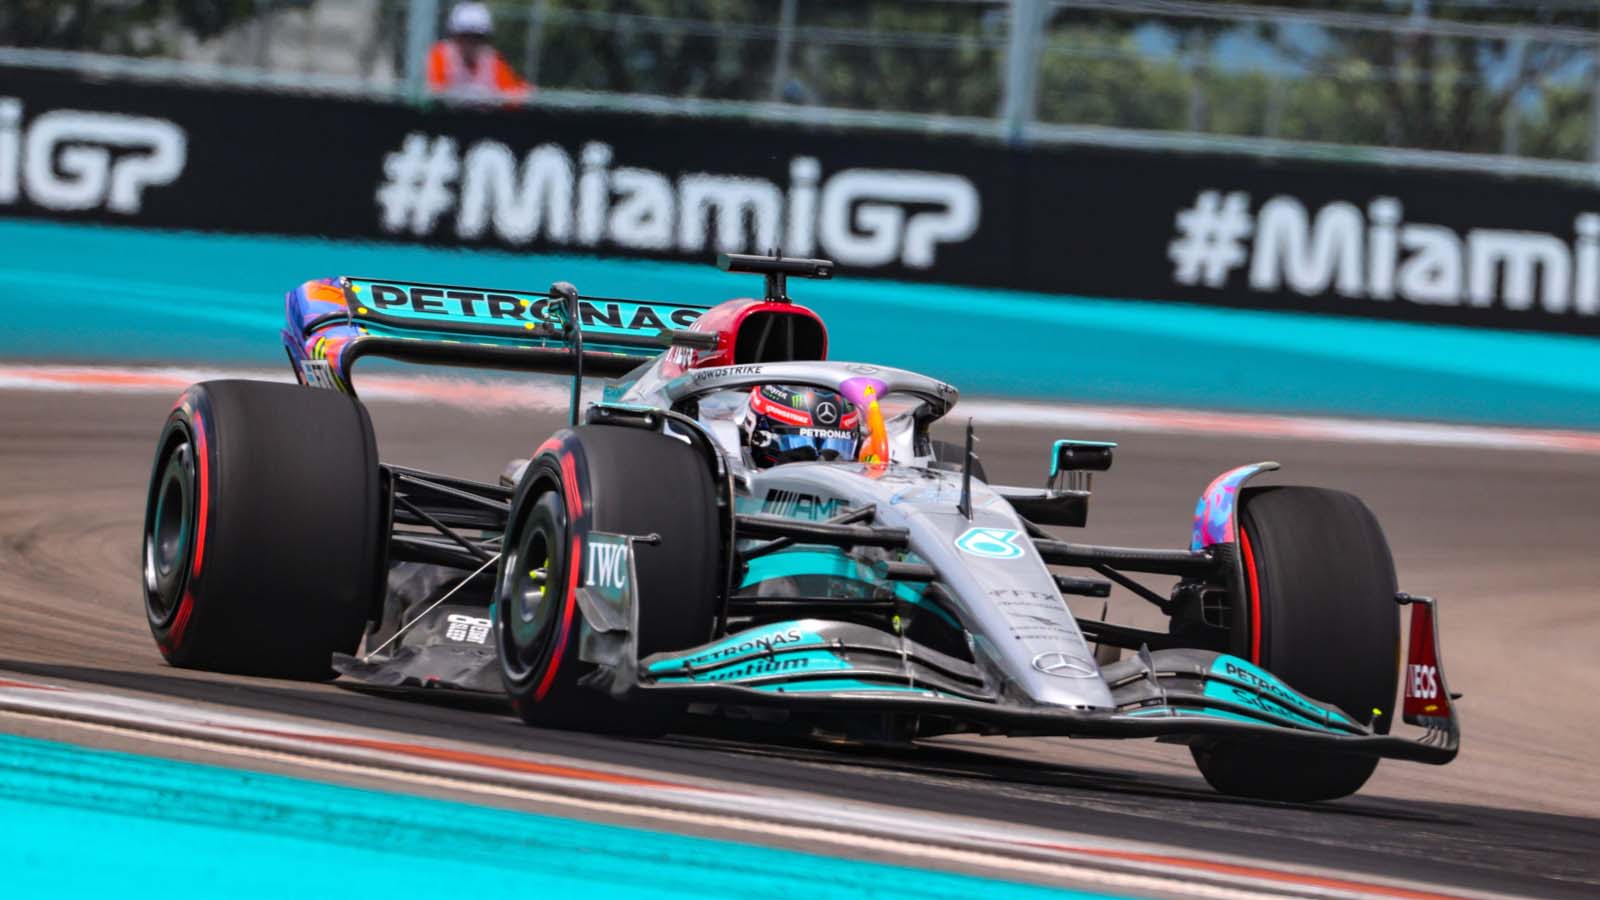 George Russell during practice. Miami GP May 2022.